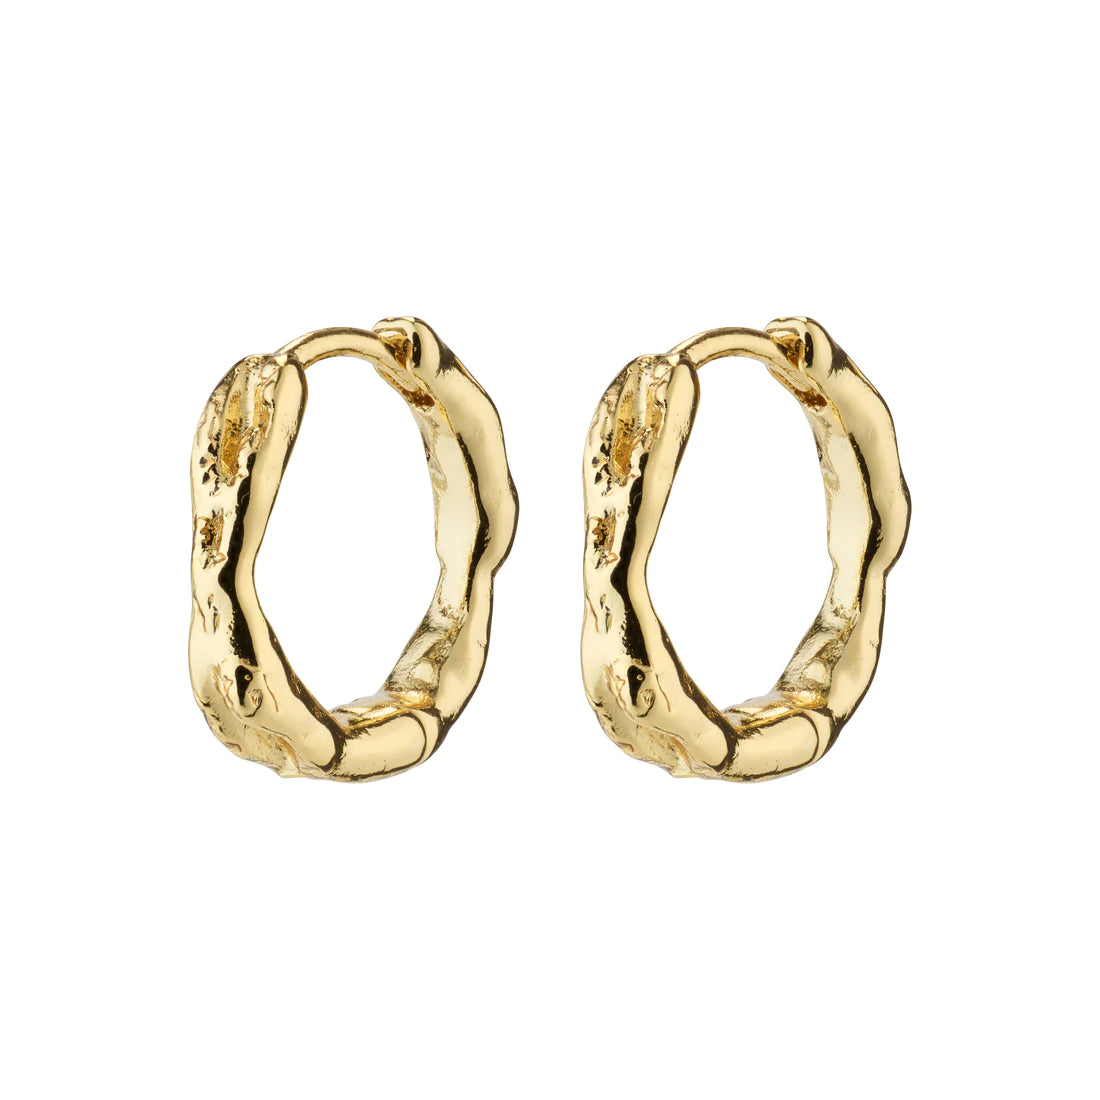 Eddy, Recycled Organic Shaped Hoops Small, Gold